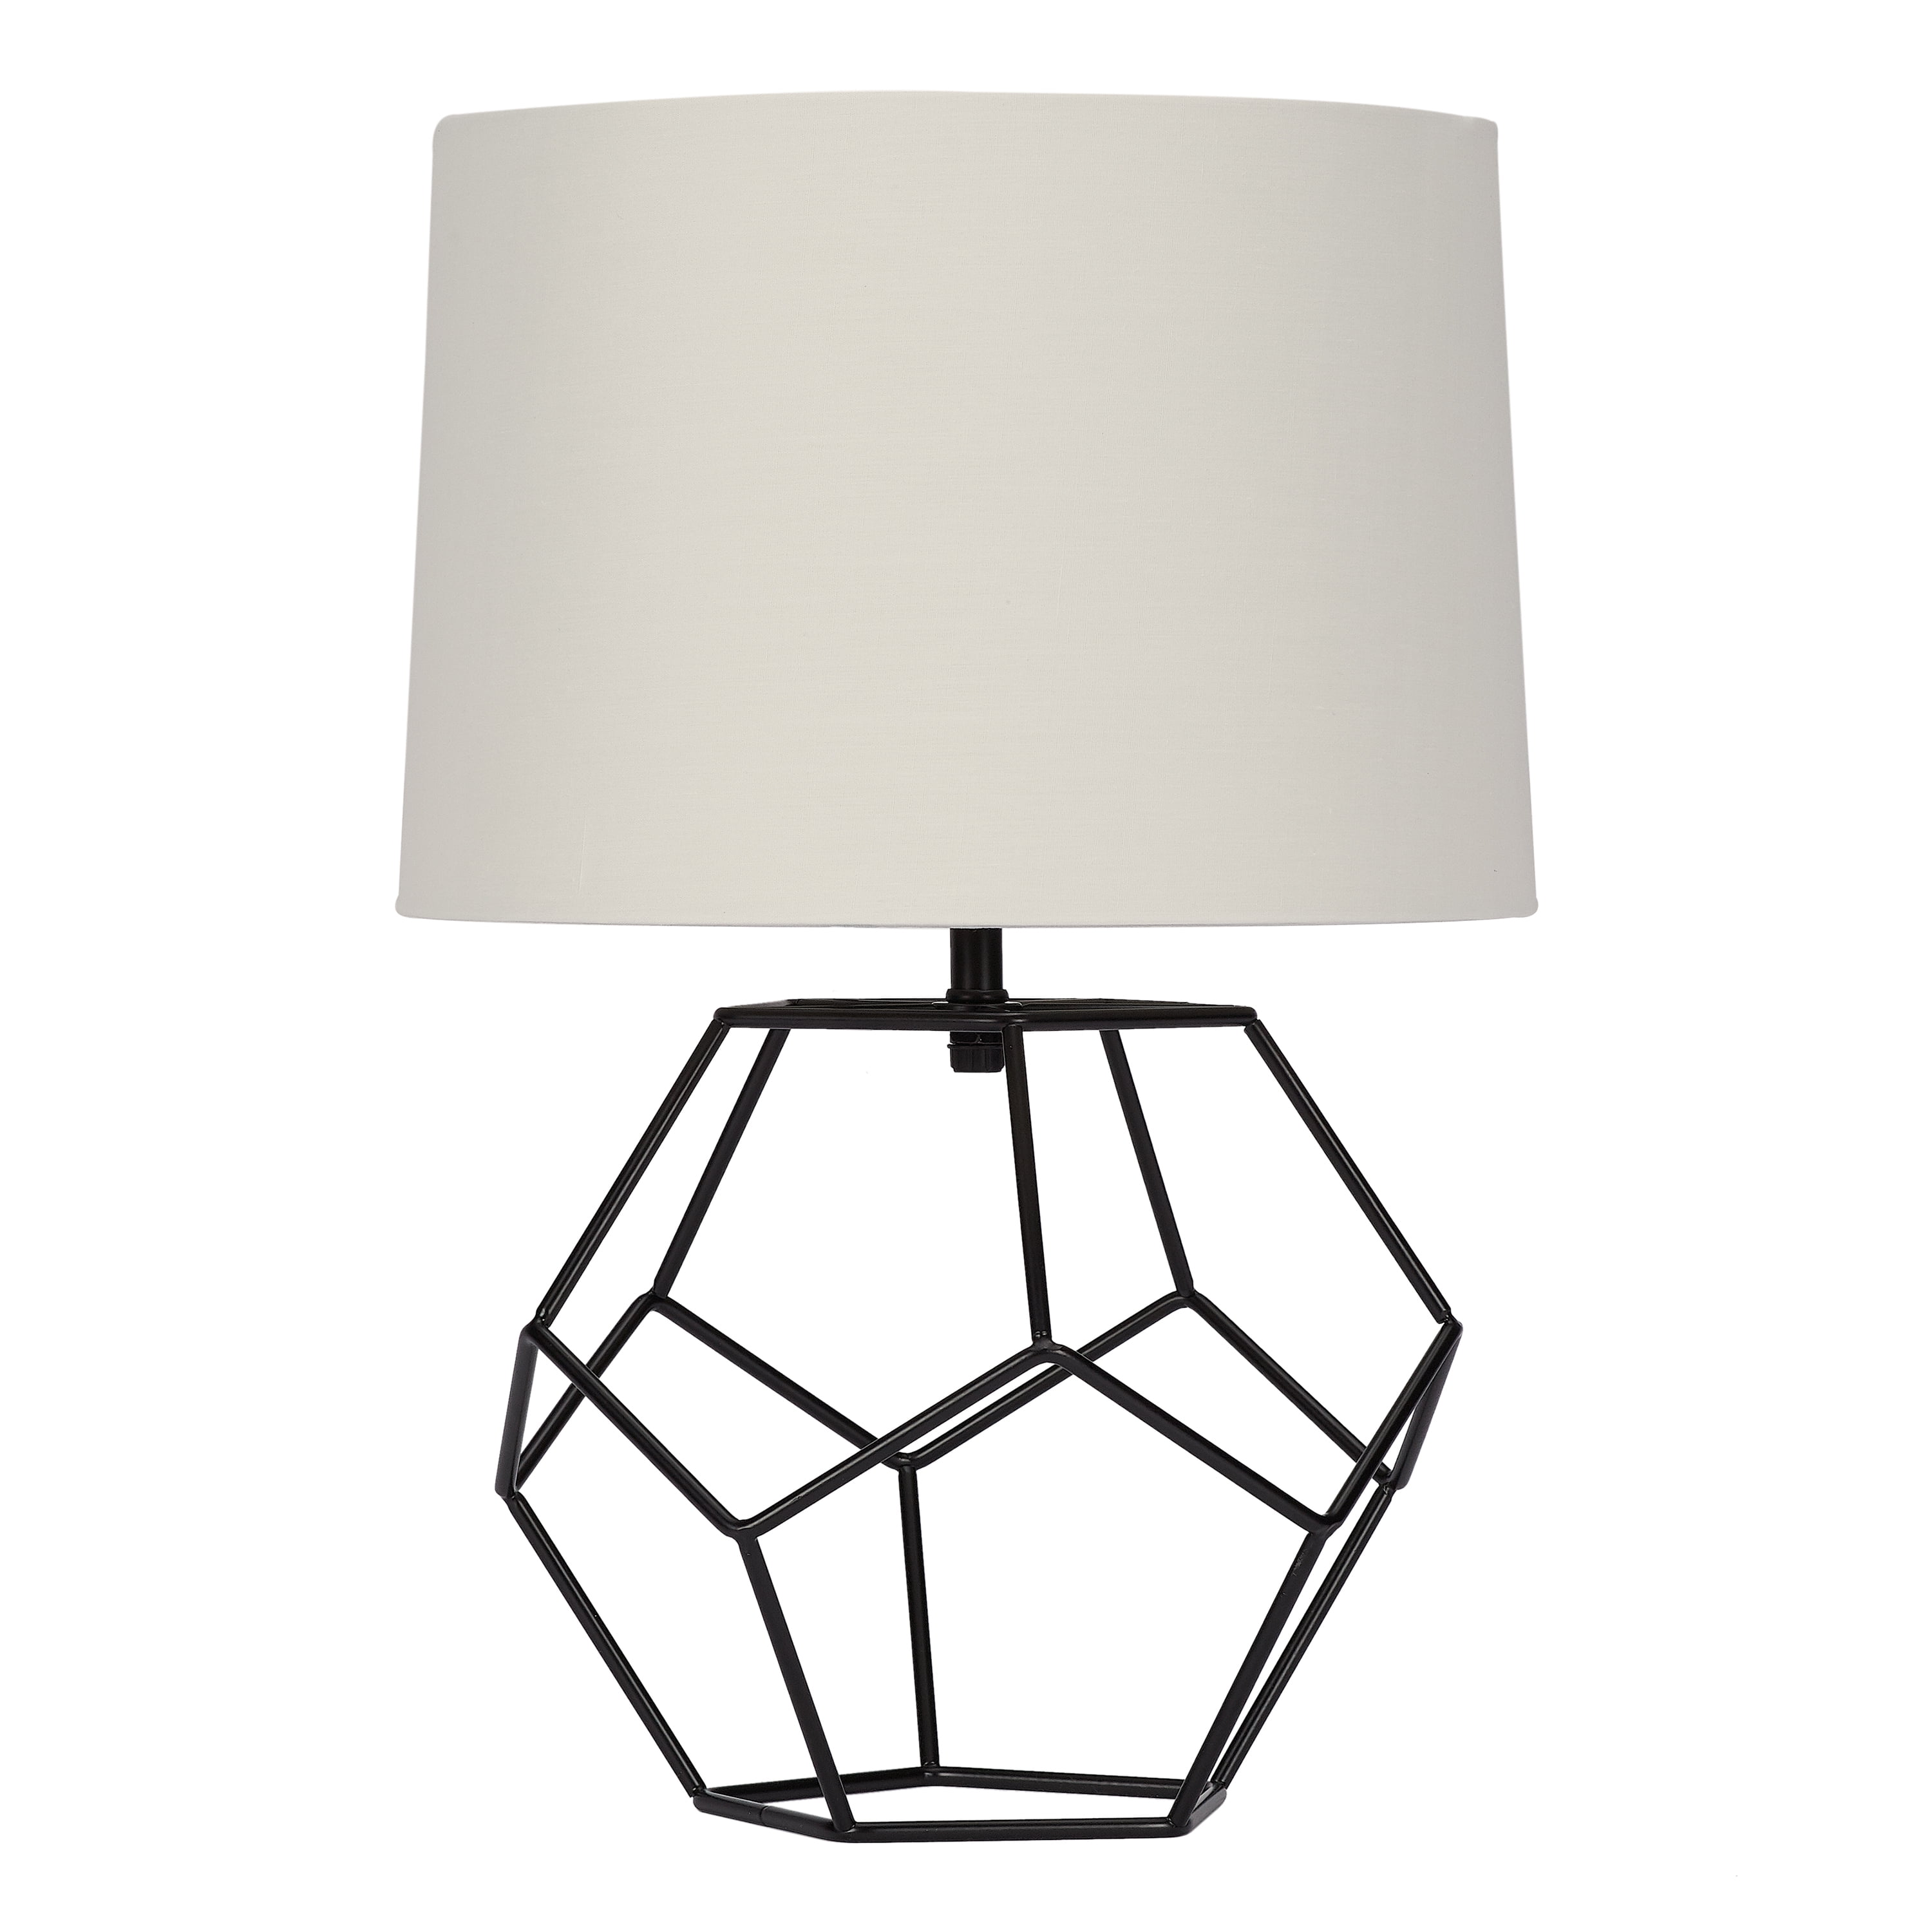 Cage Metal Base Table Lamp With Shade, Crate 038 Barrel Table Lamps